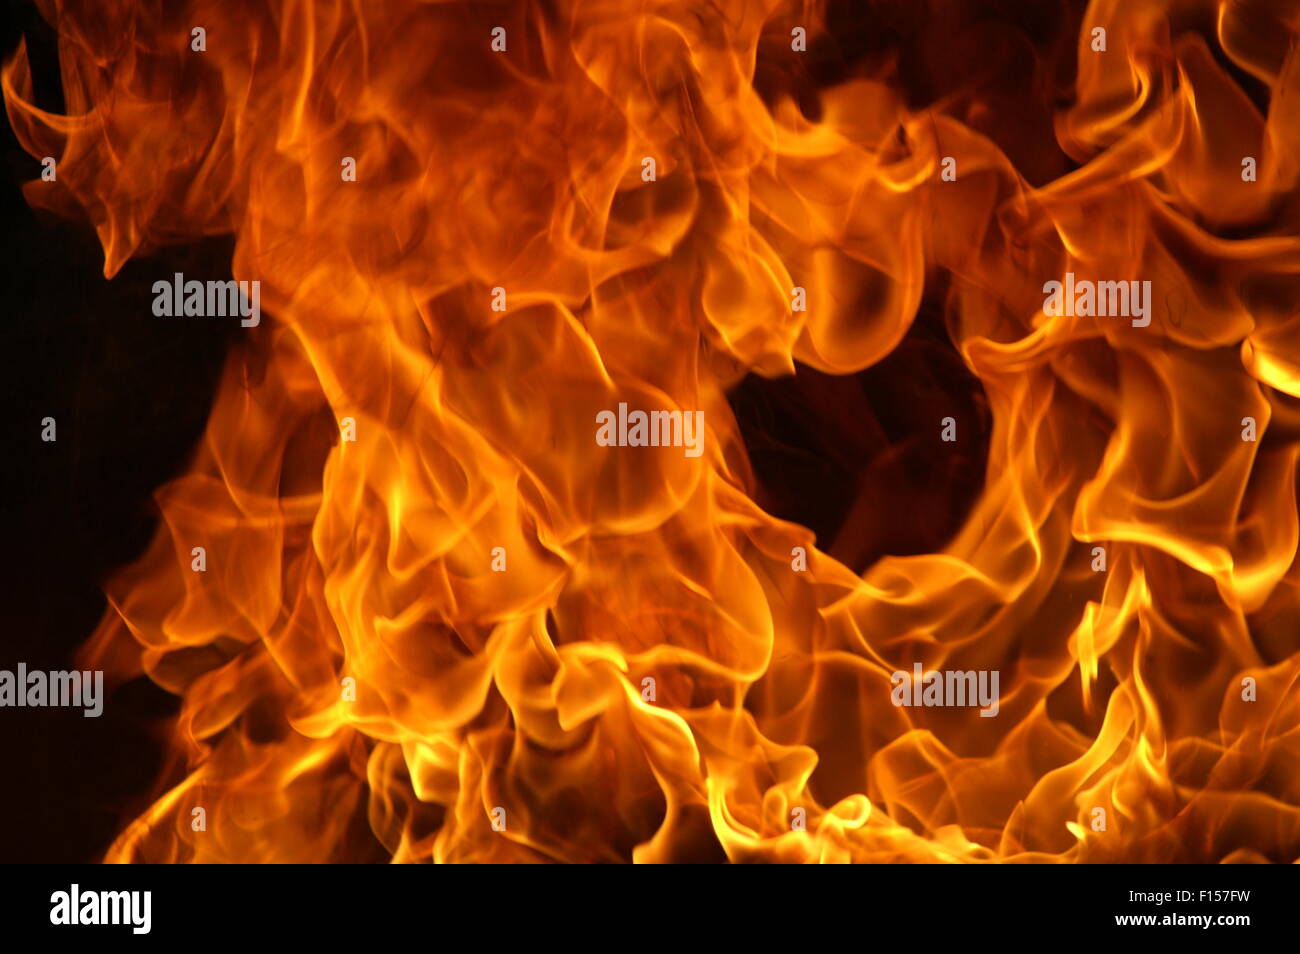 flames and fire, arson Stock Photo